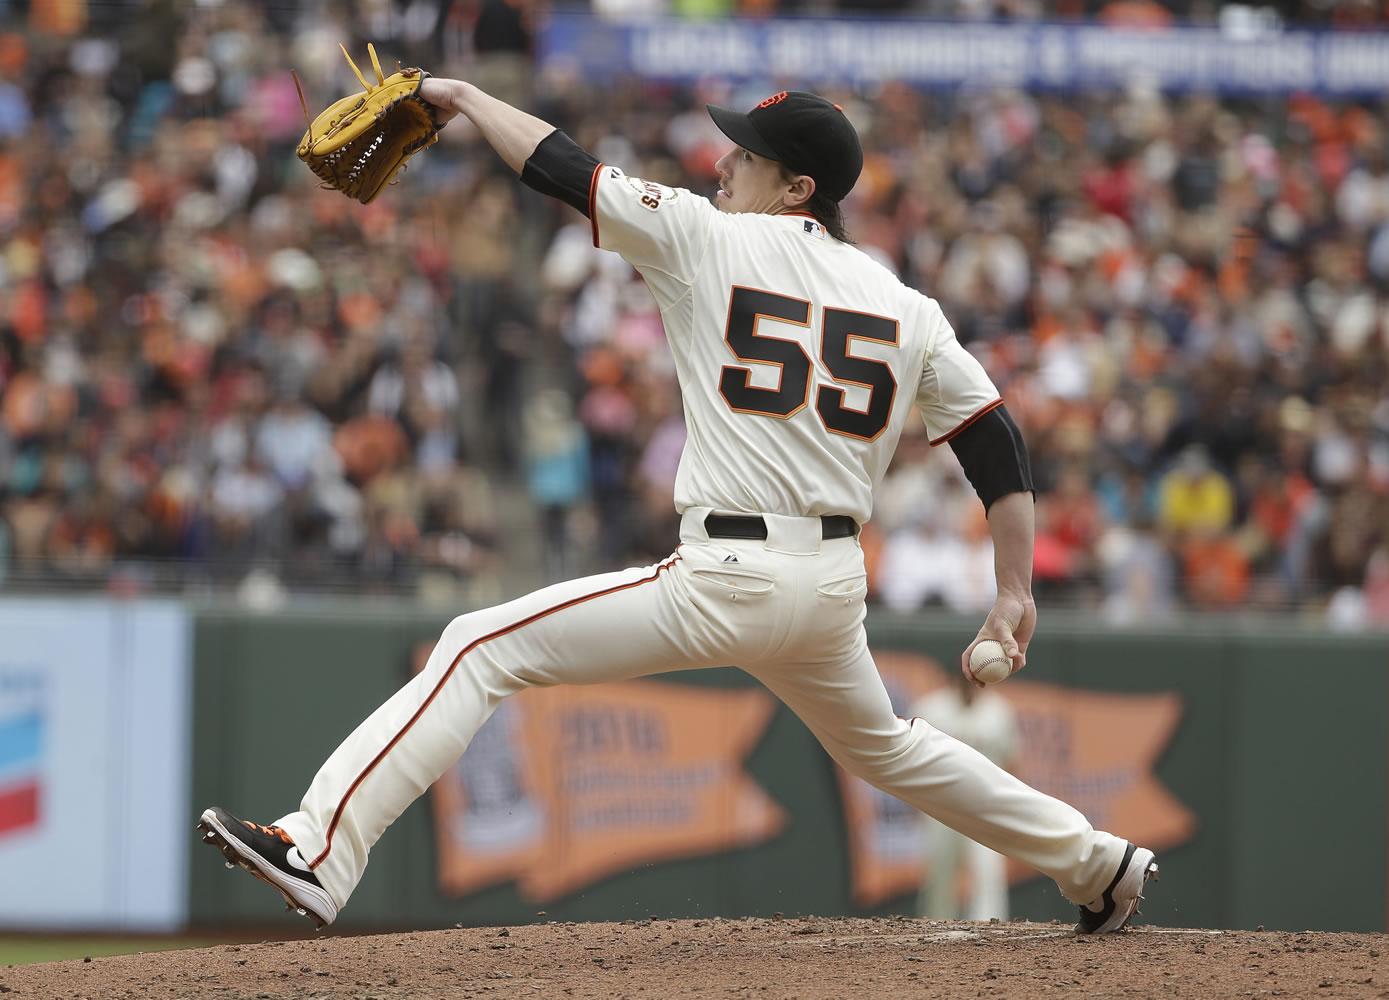 Giants' Tim Lincecum pitches 2nd no-hitter vs Padres – Daily Freeman